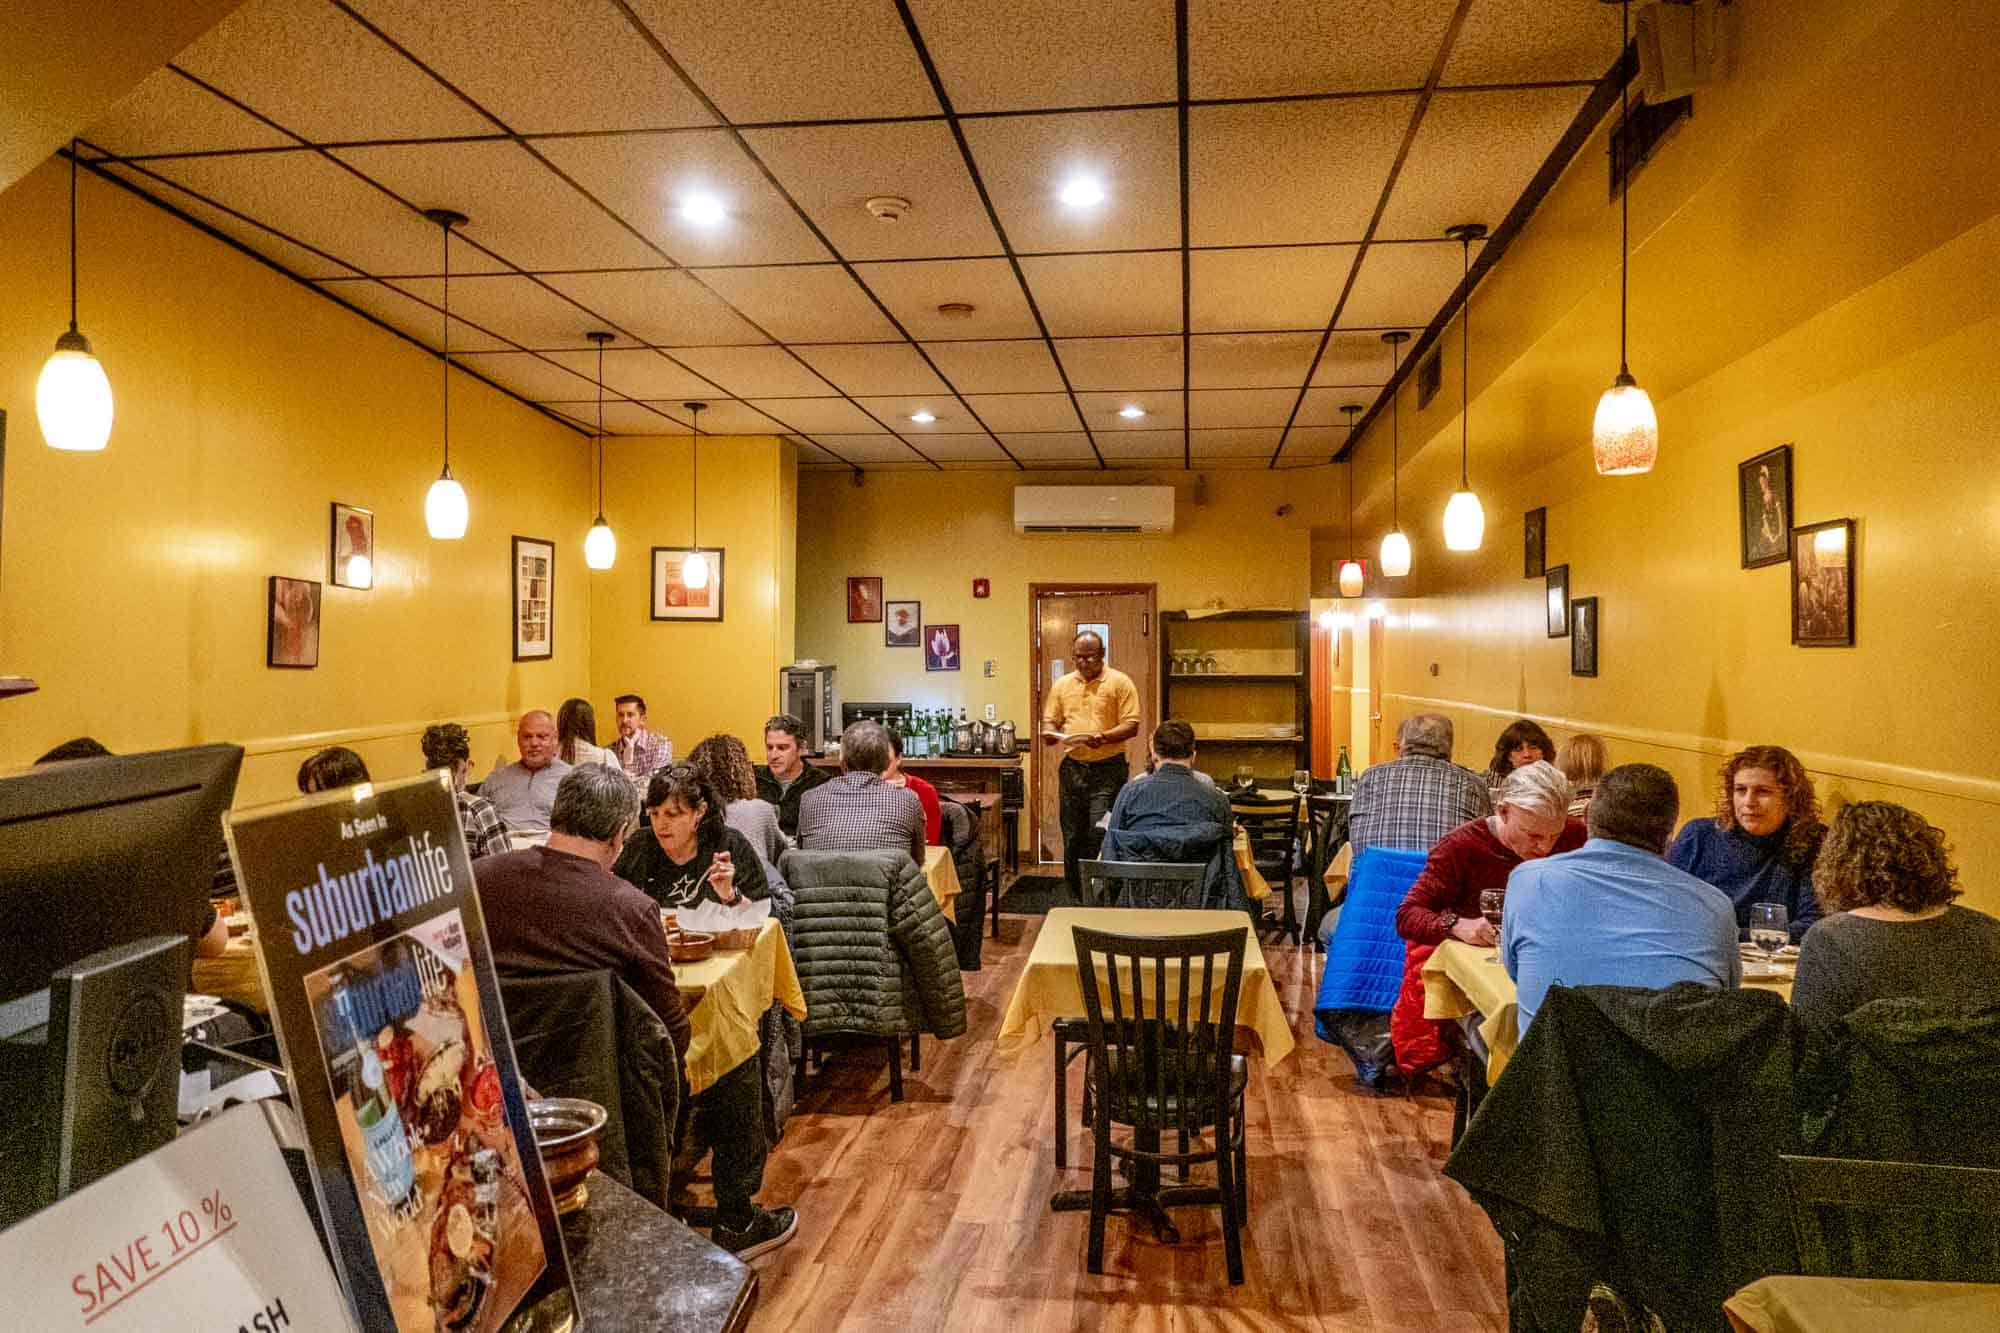 People dining in a restaurant with yellow walls